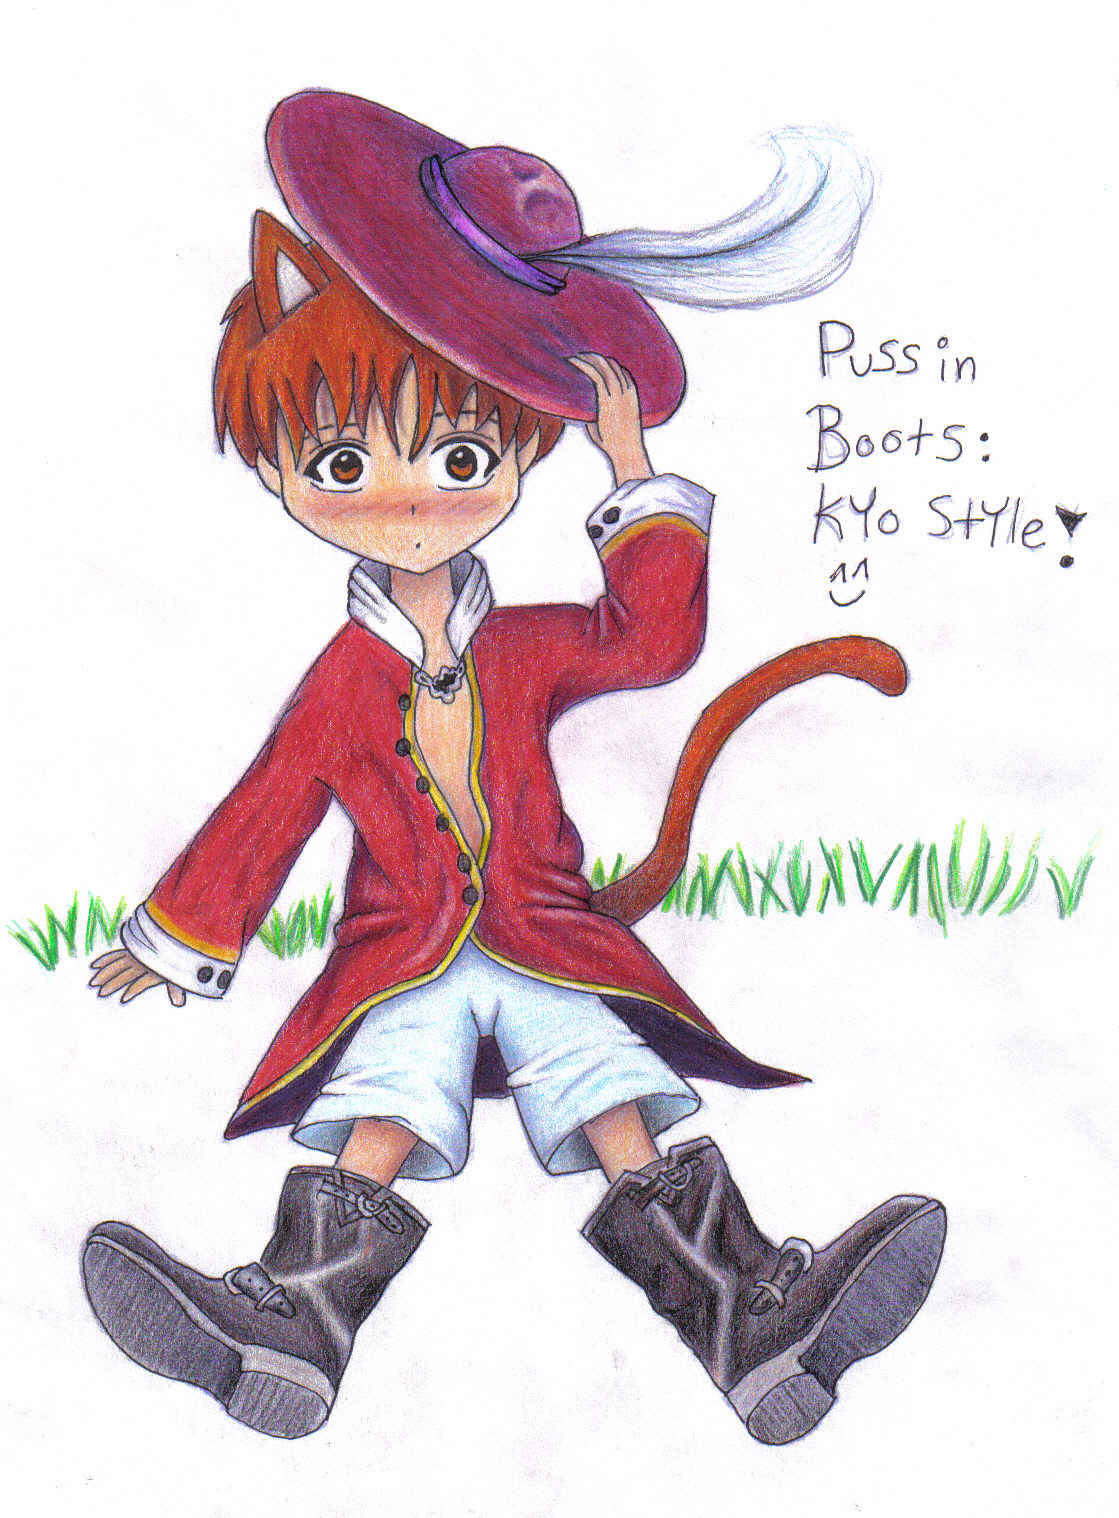 Puss in boots: Kyo style!!! now in color!! ^^ by fizzingwizbee77